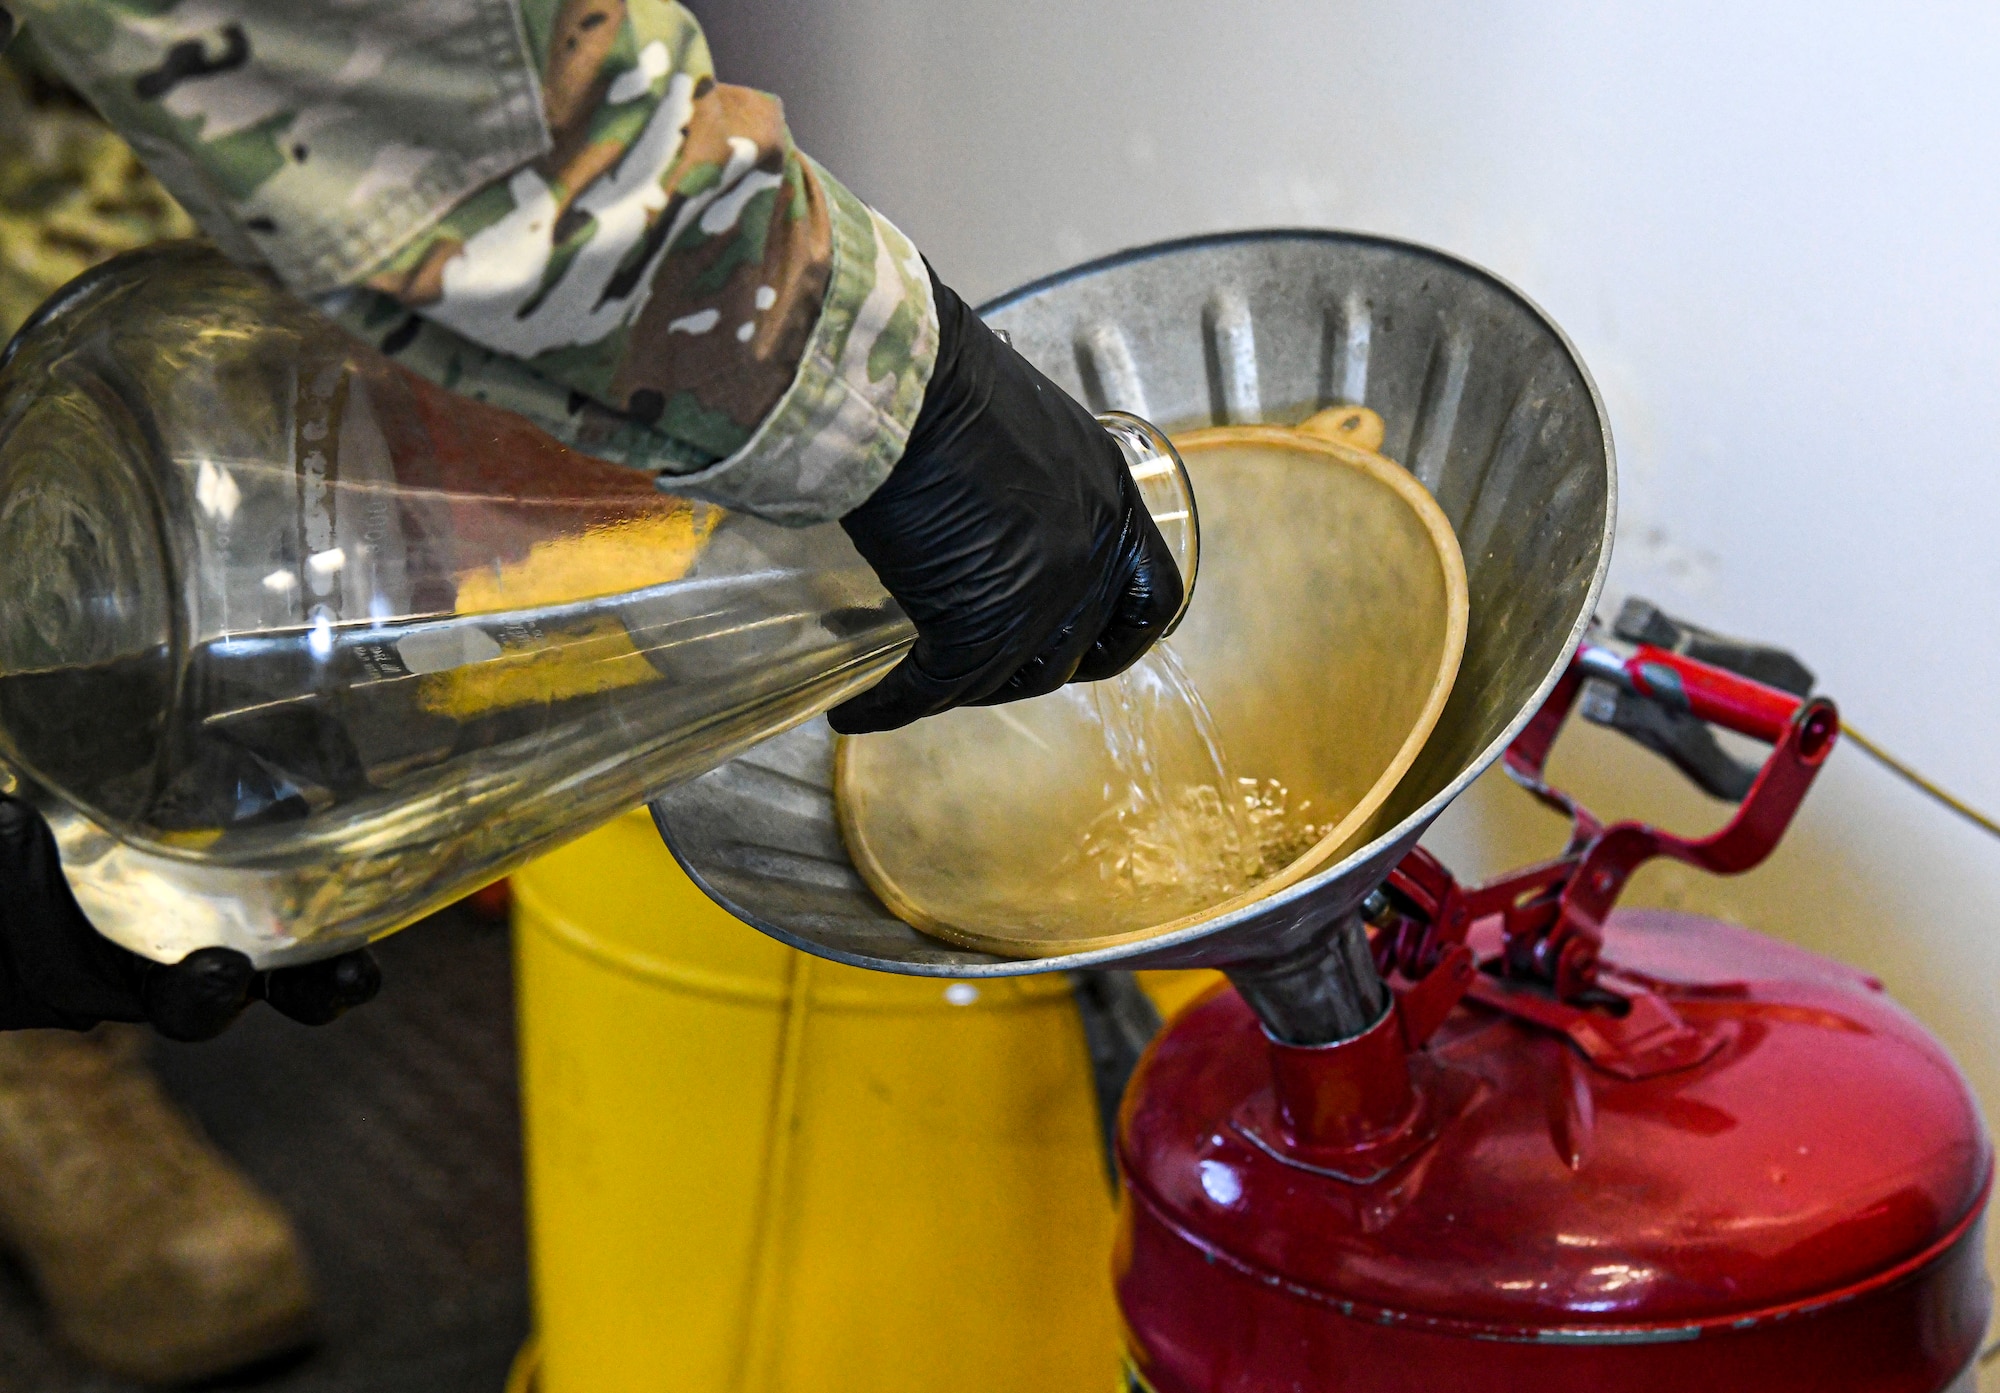 Staff Sgt. Brian Elrod, 436th Logistics Readiness Squadron fuels laboratory noncommissioned officer in charge, stores a recently tested fuel sample in a container for later redistribution at Dover Air Force Base, Delaware, Jan. 12, 2021. Fuel is inspected daily to ensure all aircraft receive the cleanest fuel possible. (U.S. Air Force photo by Airman 1st Class Stephani Barge)